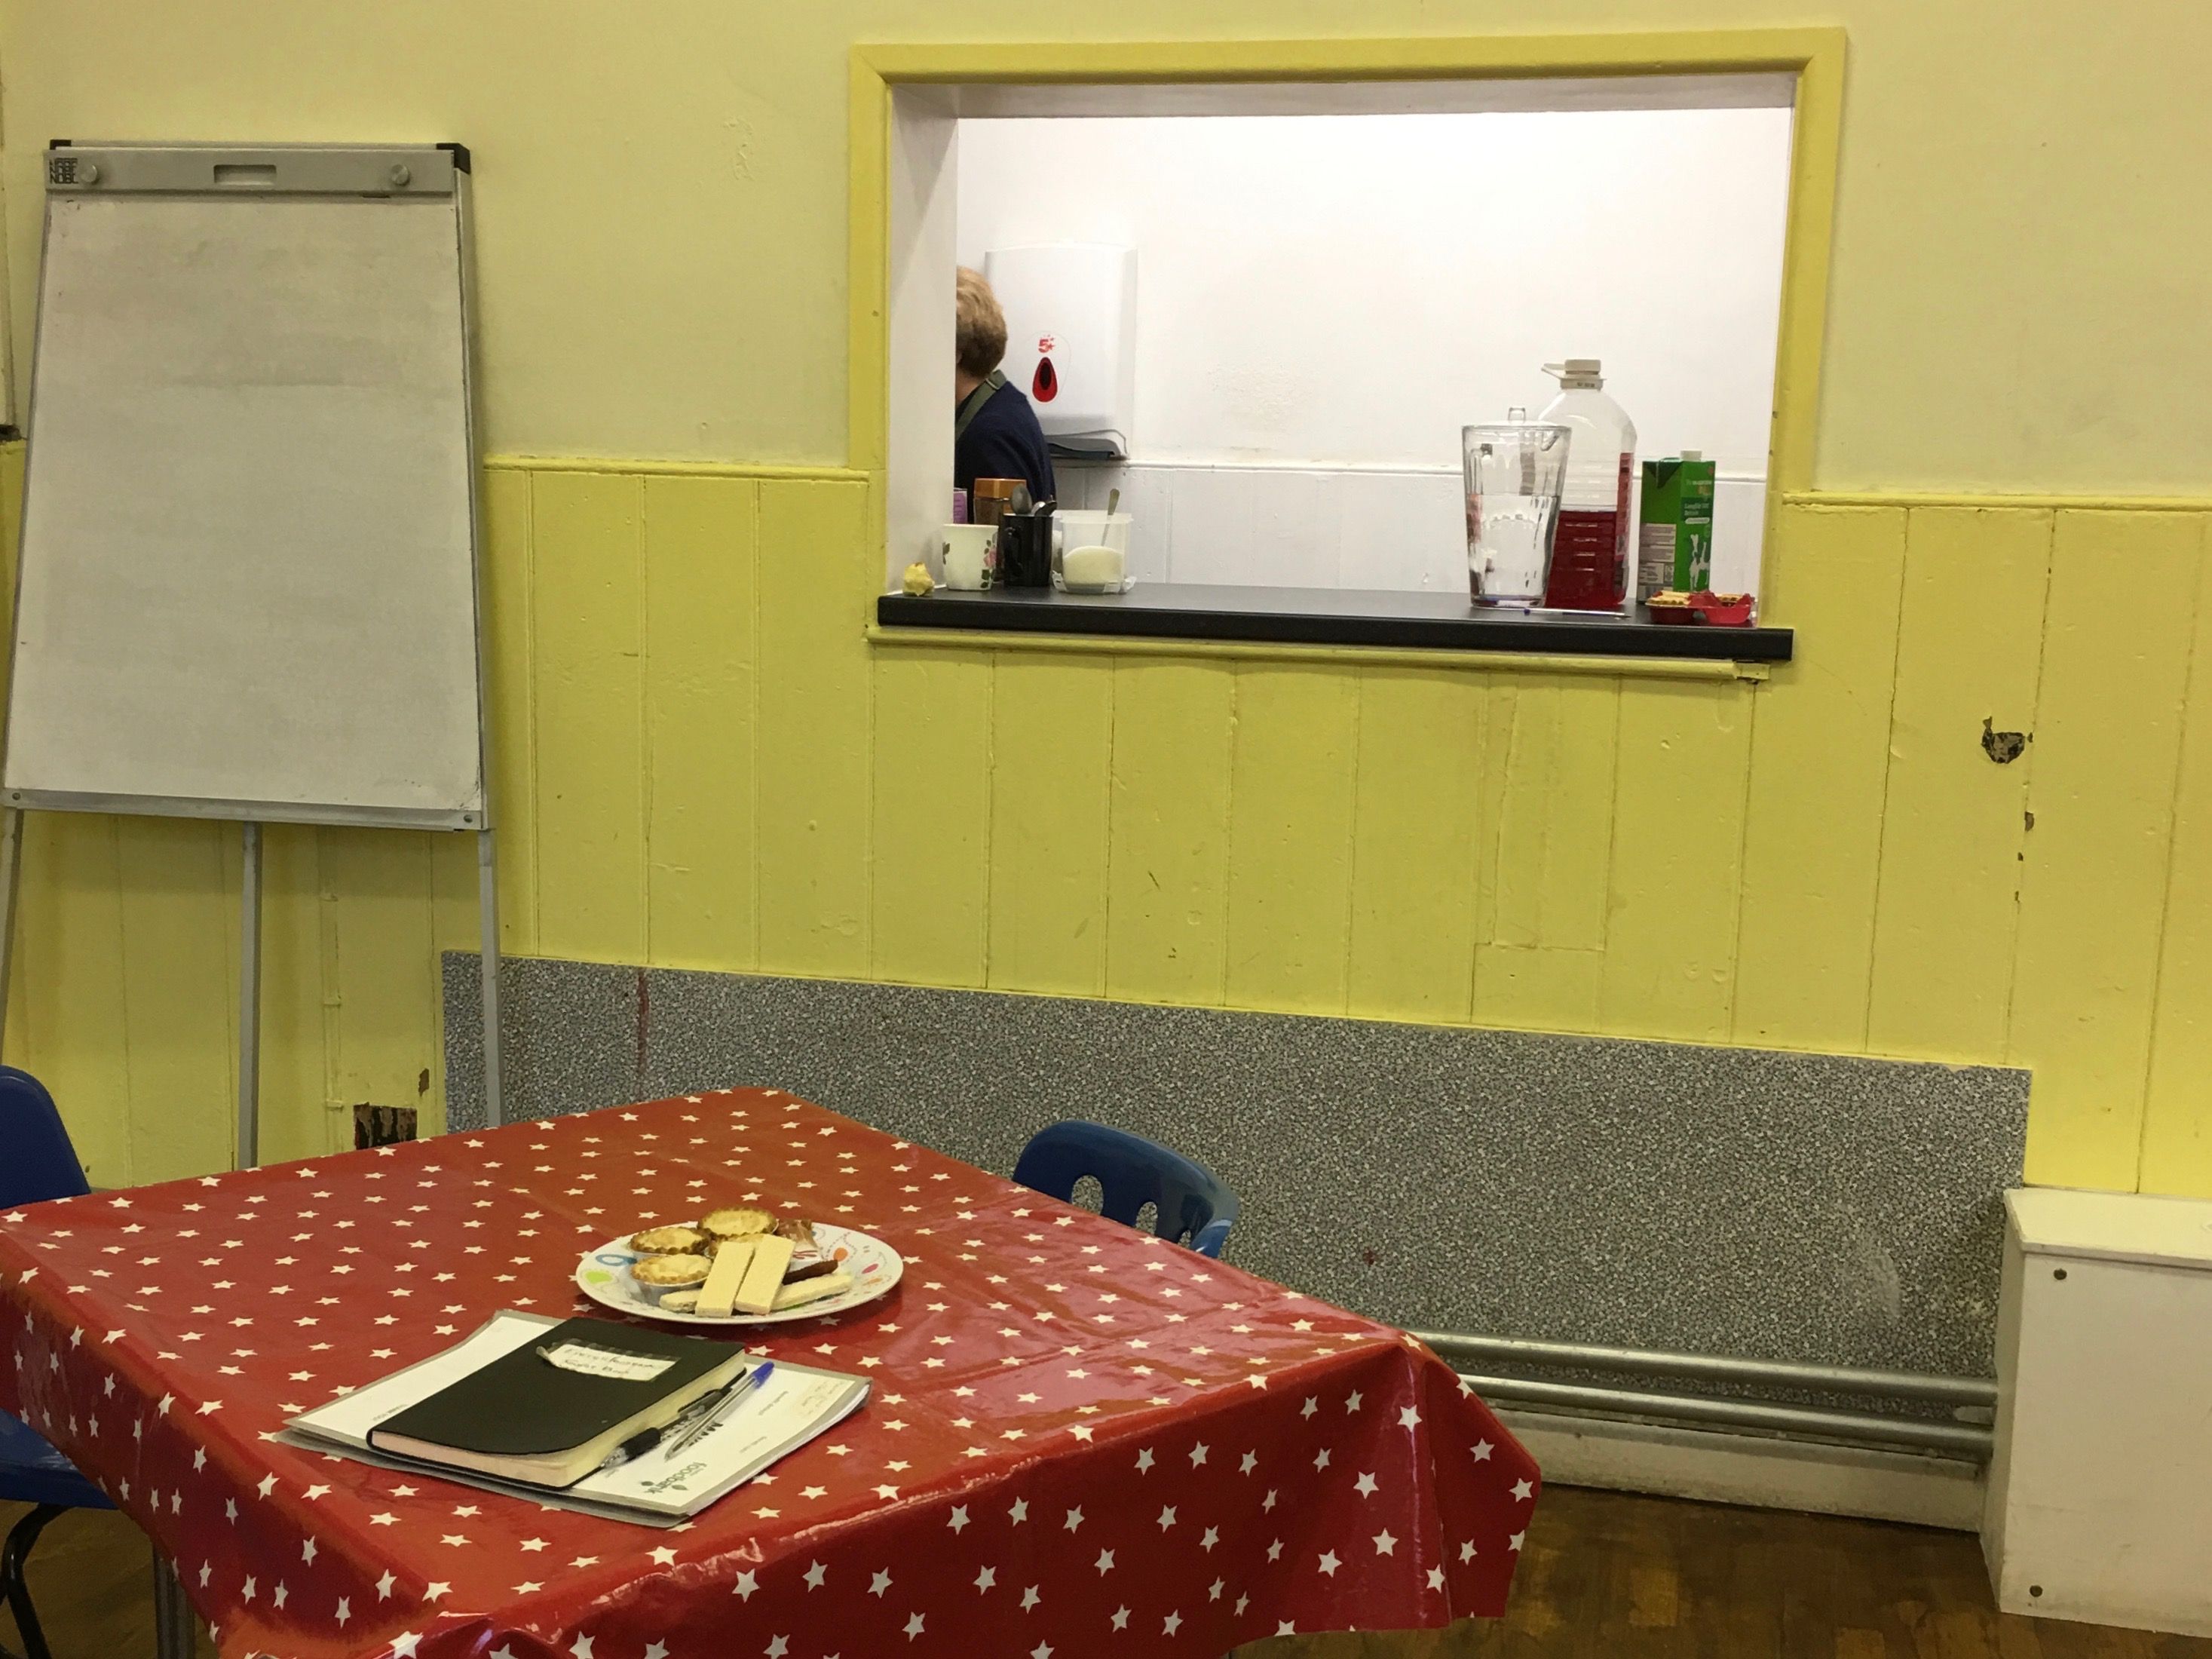 The peep hole to a small kitchen. Coffee and tea are always available for the clients, as well as biscuits and treats on the table. There is also a guest book which encourages clients to write down their stories. These are then used to end stigma around individuals using food banks. Image by Caitlin Bawn. England, 2016.